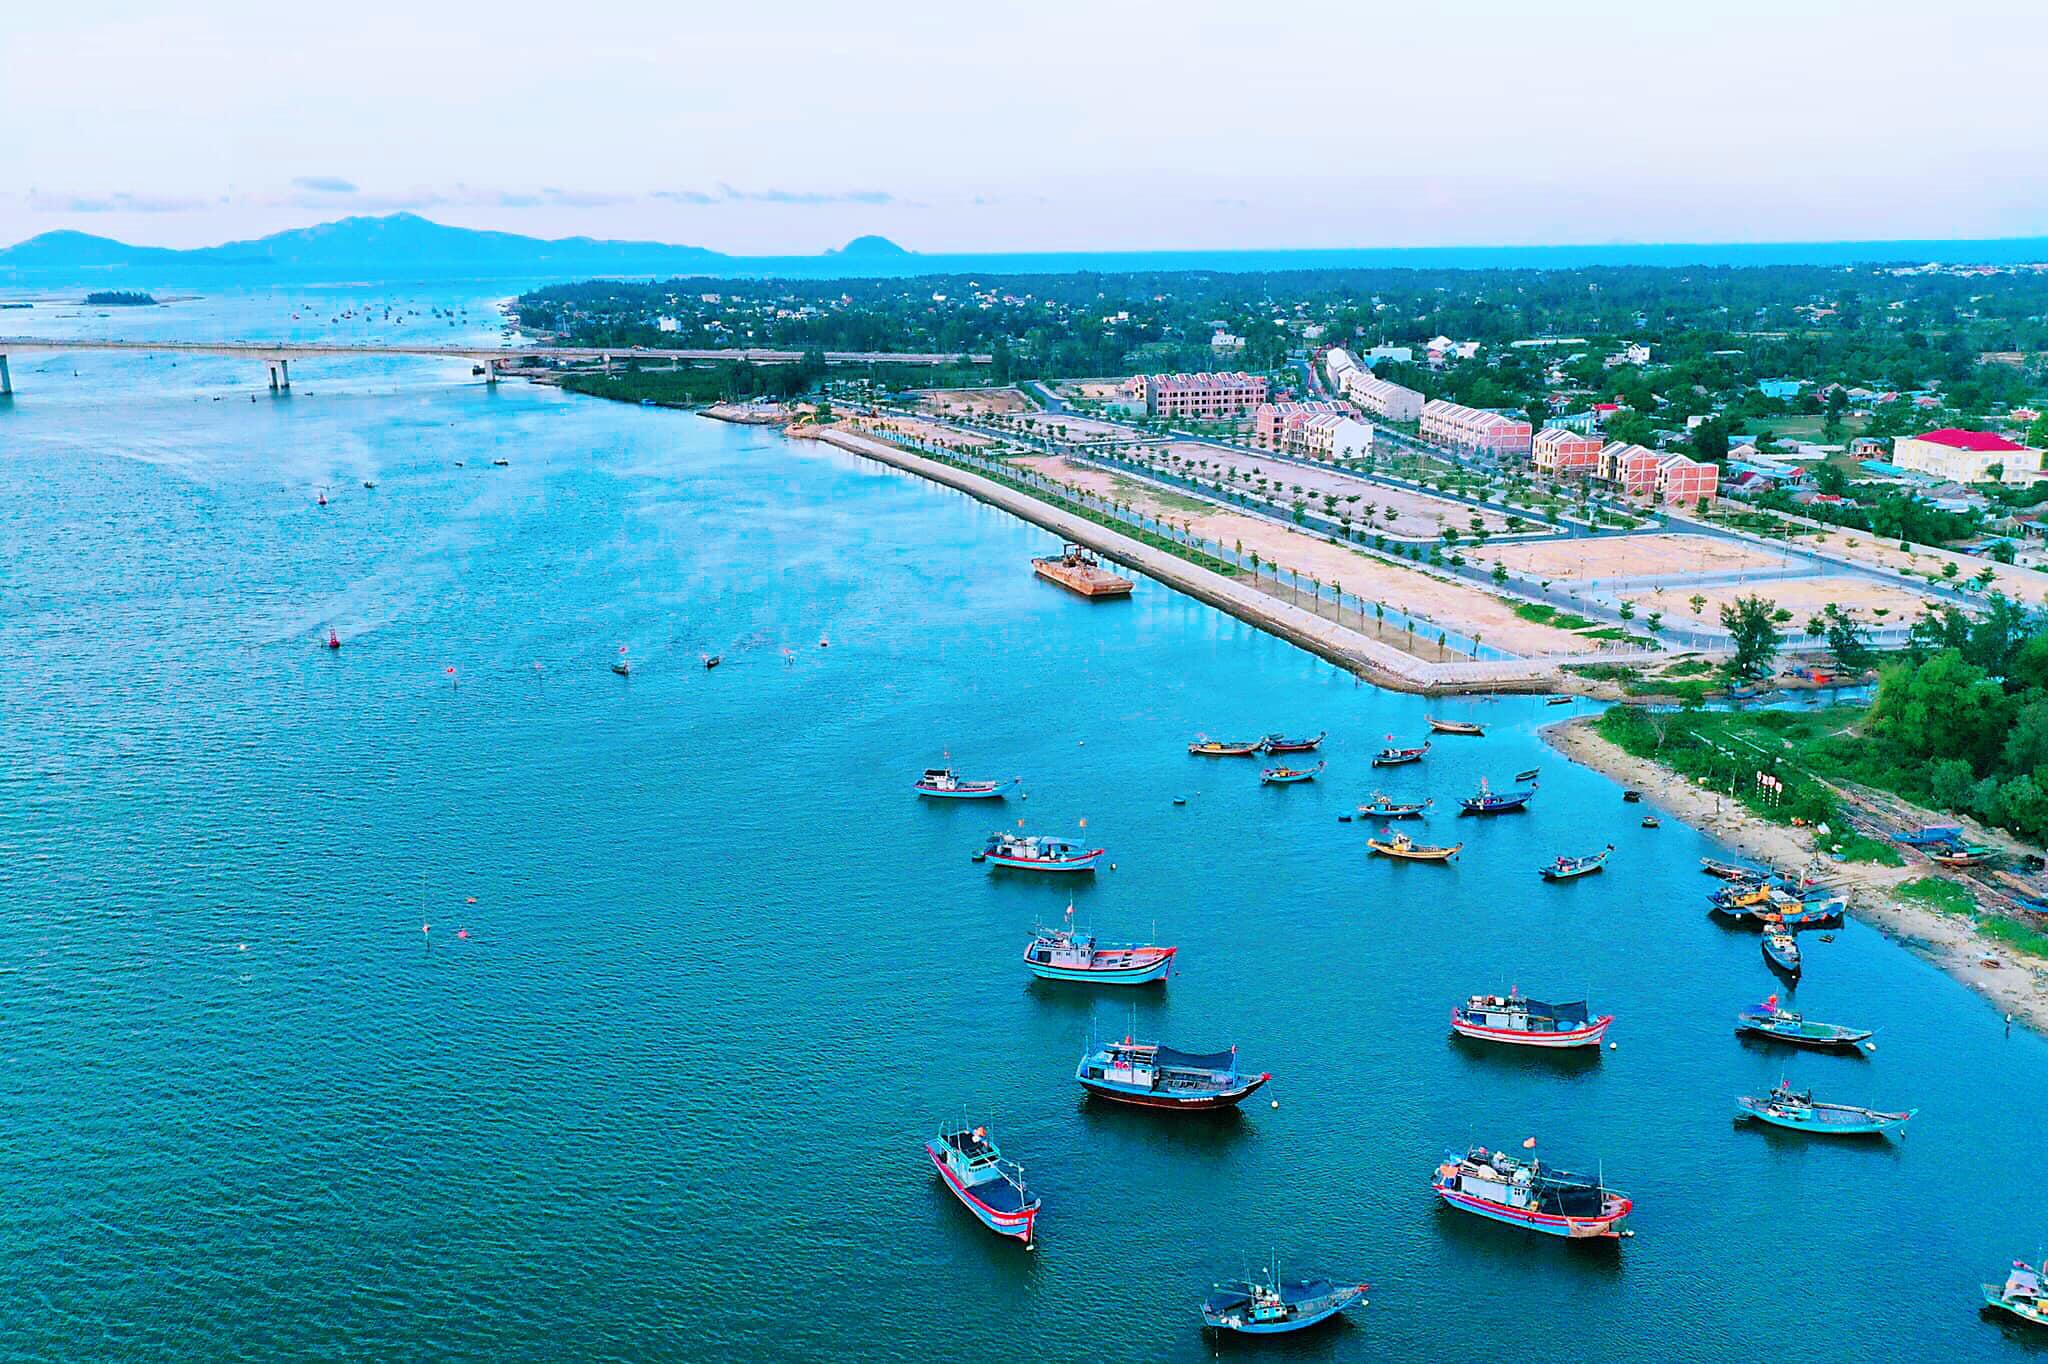 SOUTHERN HOI AN CITY - WELCOME NEW TRENDS OF LUXURIOUS CONVENIENT ATTRACTIONS